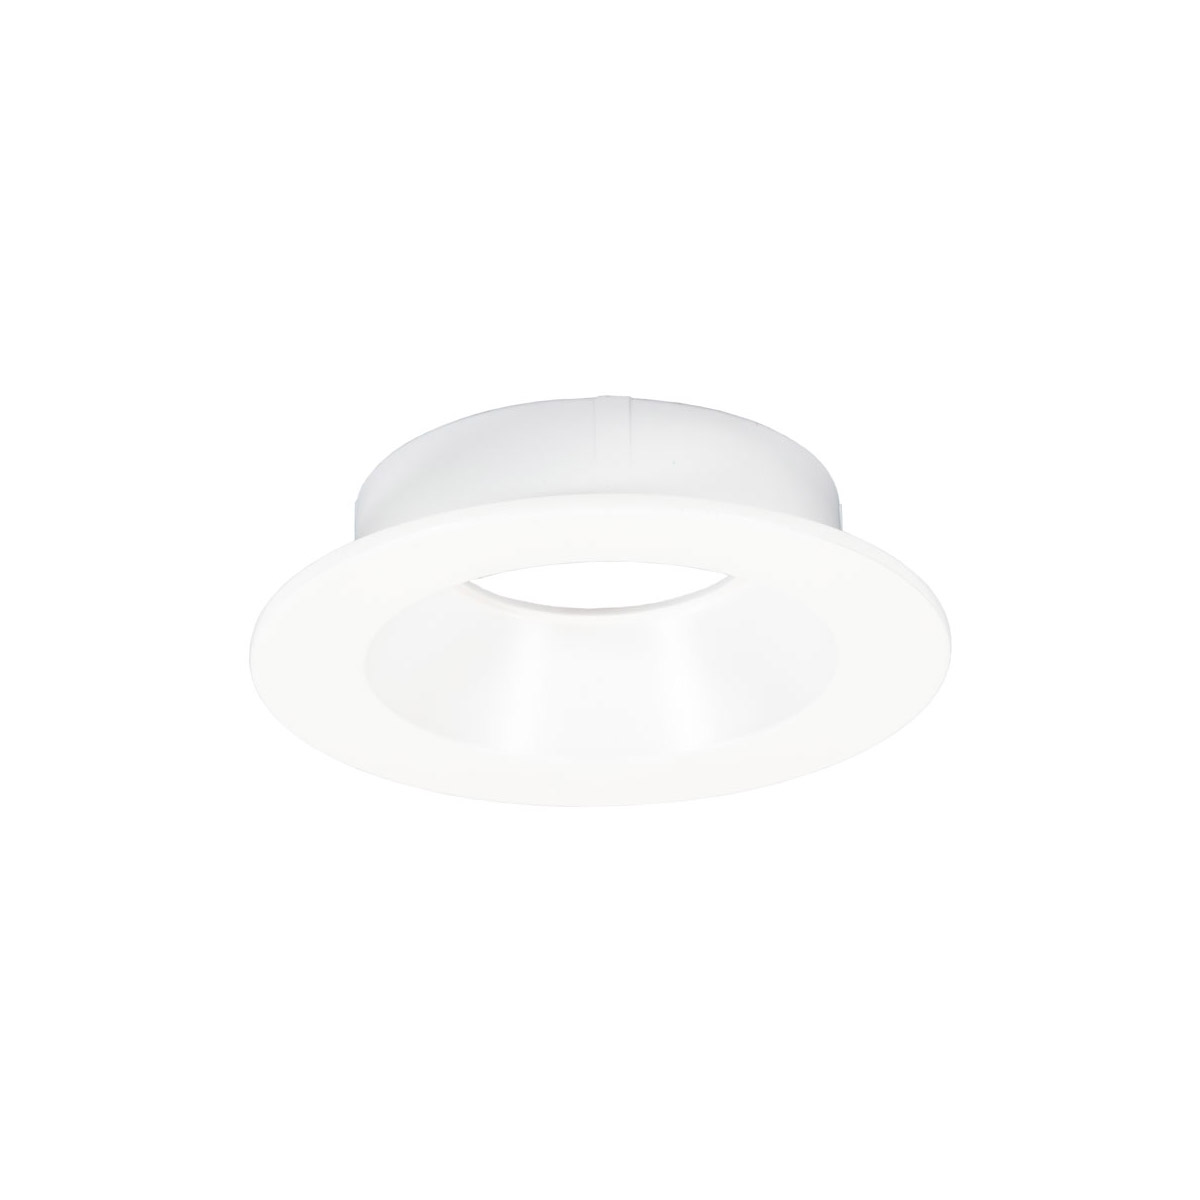 Picture of Jesco RLT-4101-WH 4 in. Downlight Round Trim for RLF-4115 Light Engine, White